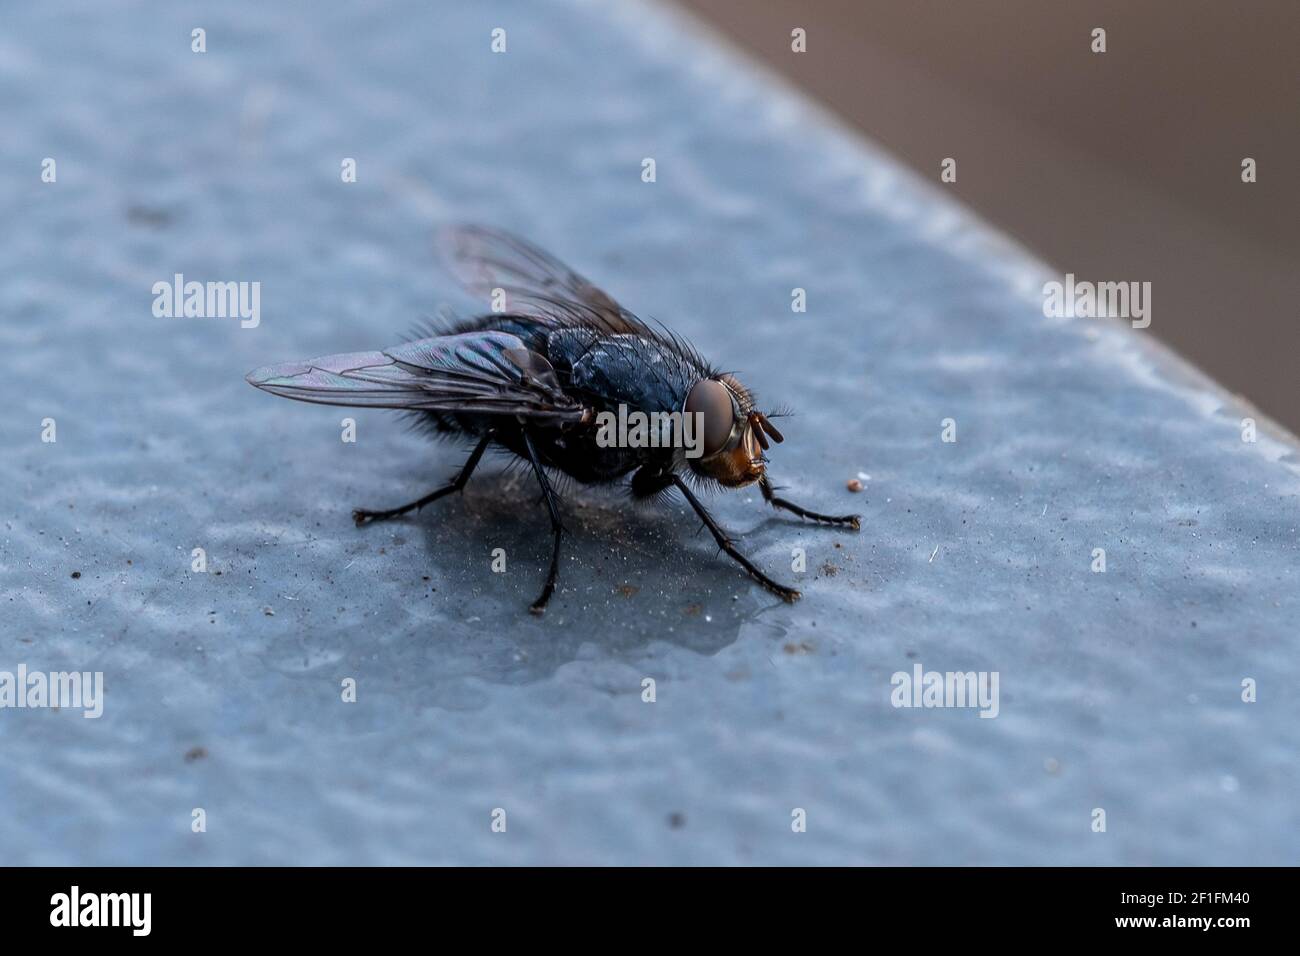 Housefly (Latin name: musca domestica) close up view Stock Photo